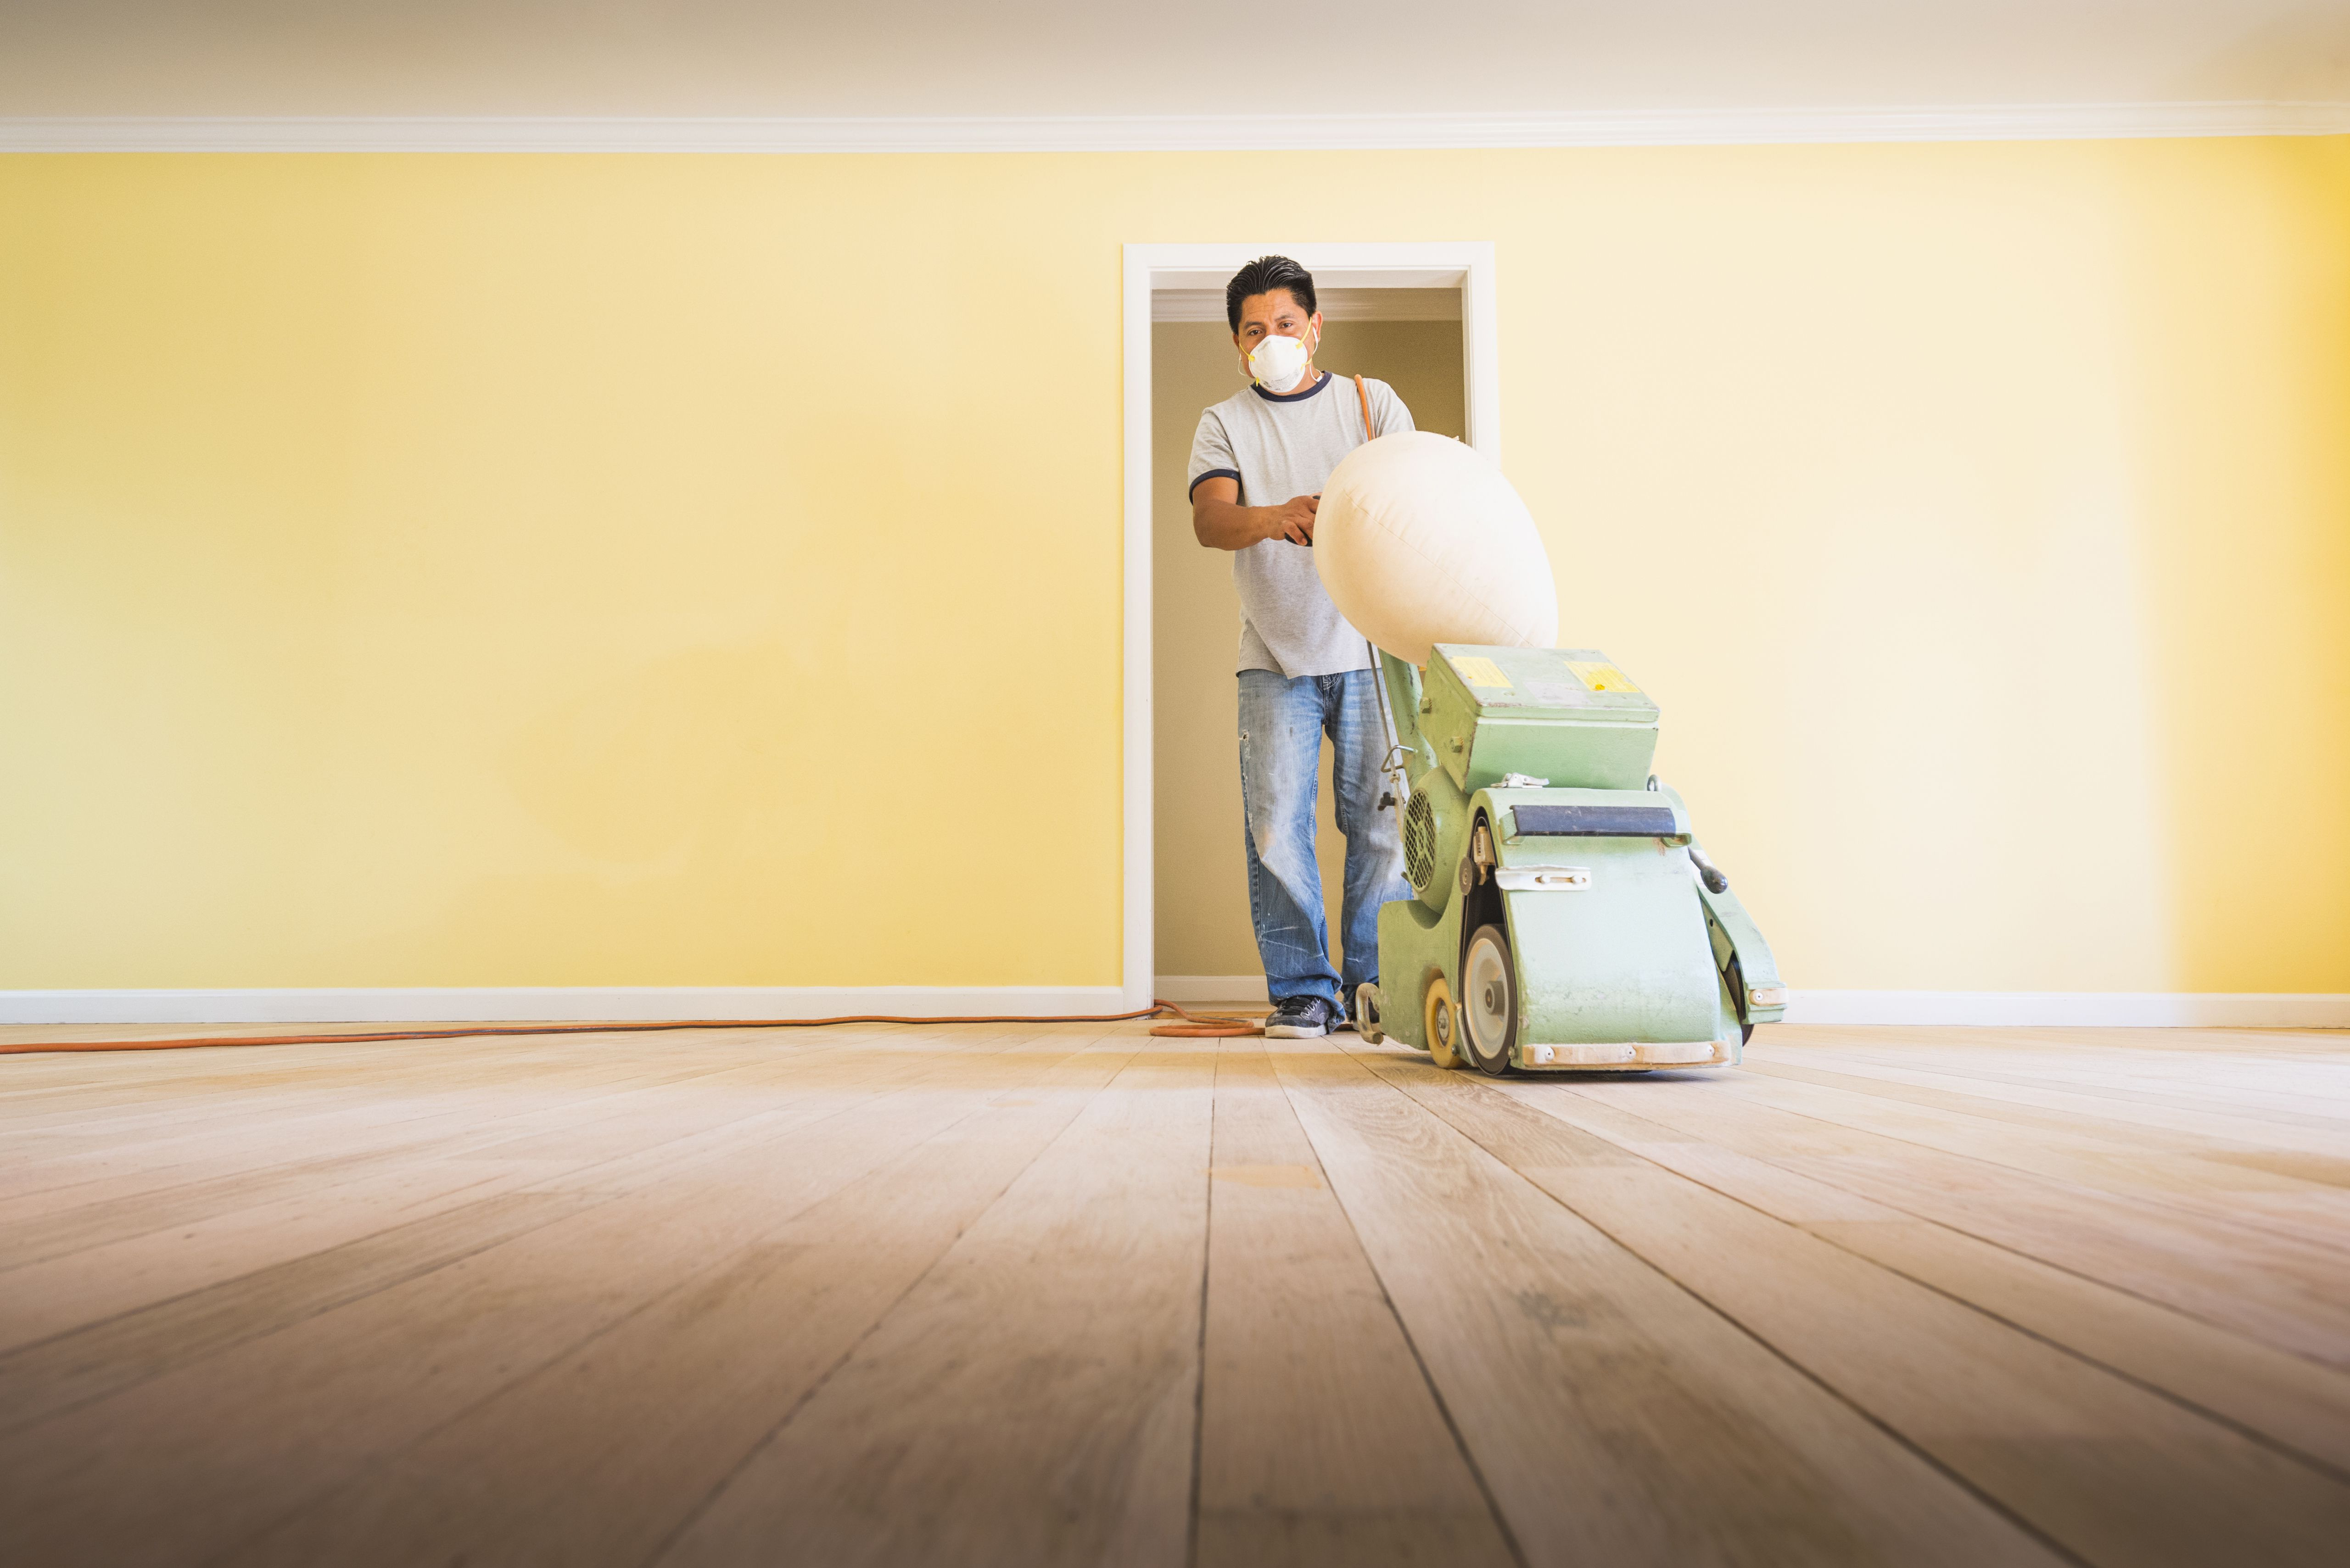 how to refinish hand scraped hardwood floors of should you paint walls or refinish floors first intended for floorsandingafterpainting 5a8f08dfae9ab80037d9d878